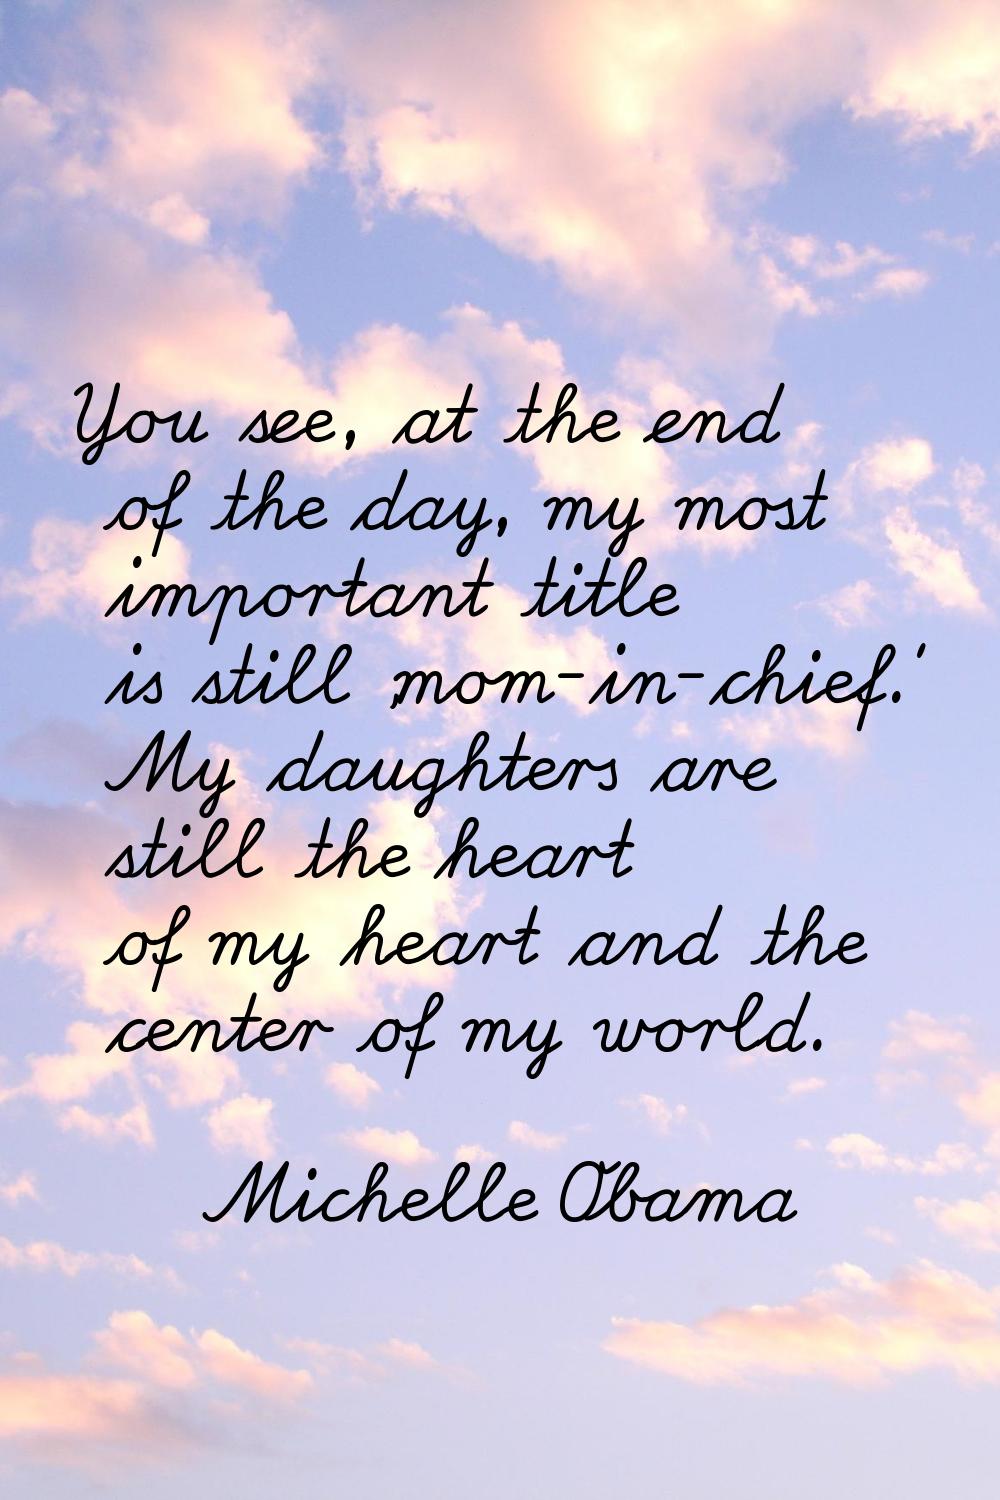 You see, at the end of the day, my most important title is still 'mom-in-chief.' My daughters are s